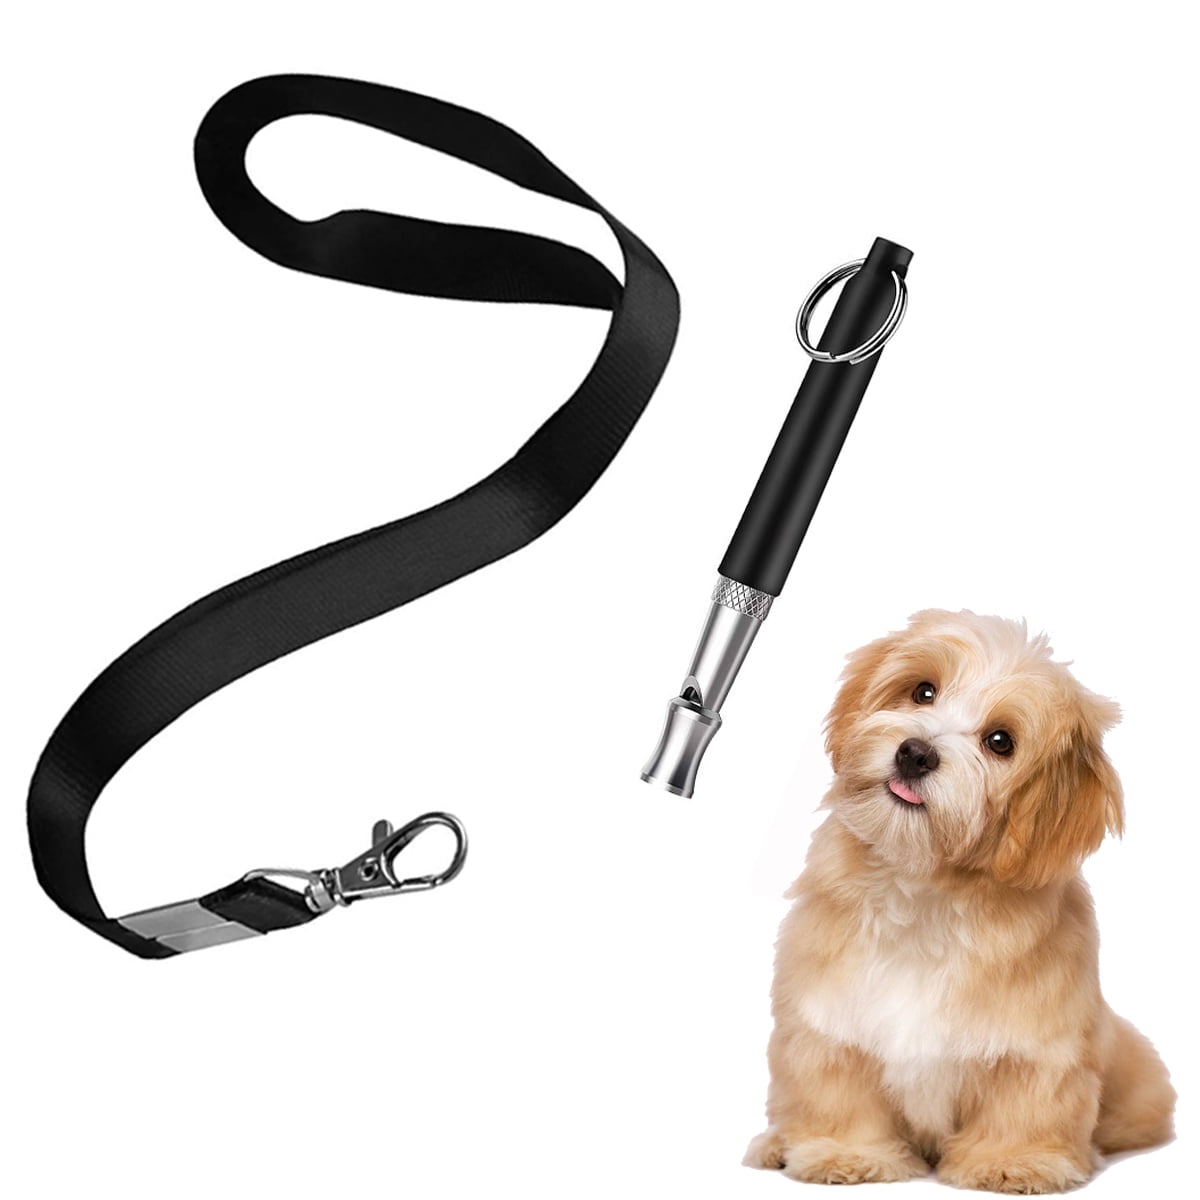 Black XQFI Dog Whistle Professional Dog Training Whistle to Stop Barking,Professional Ultrasonic Adjustable High Pitch Ultra-Sonic Sound Tool with Free Premium Quality Lanyard Strap